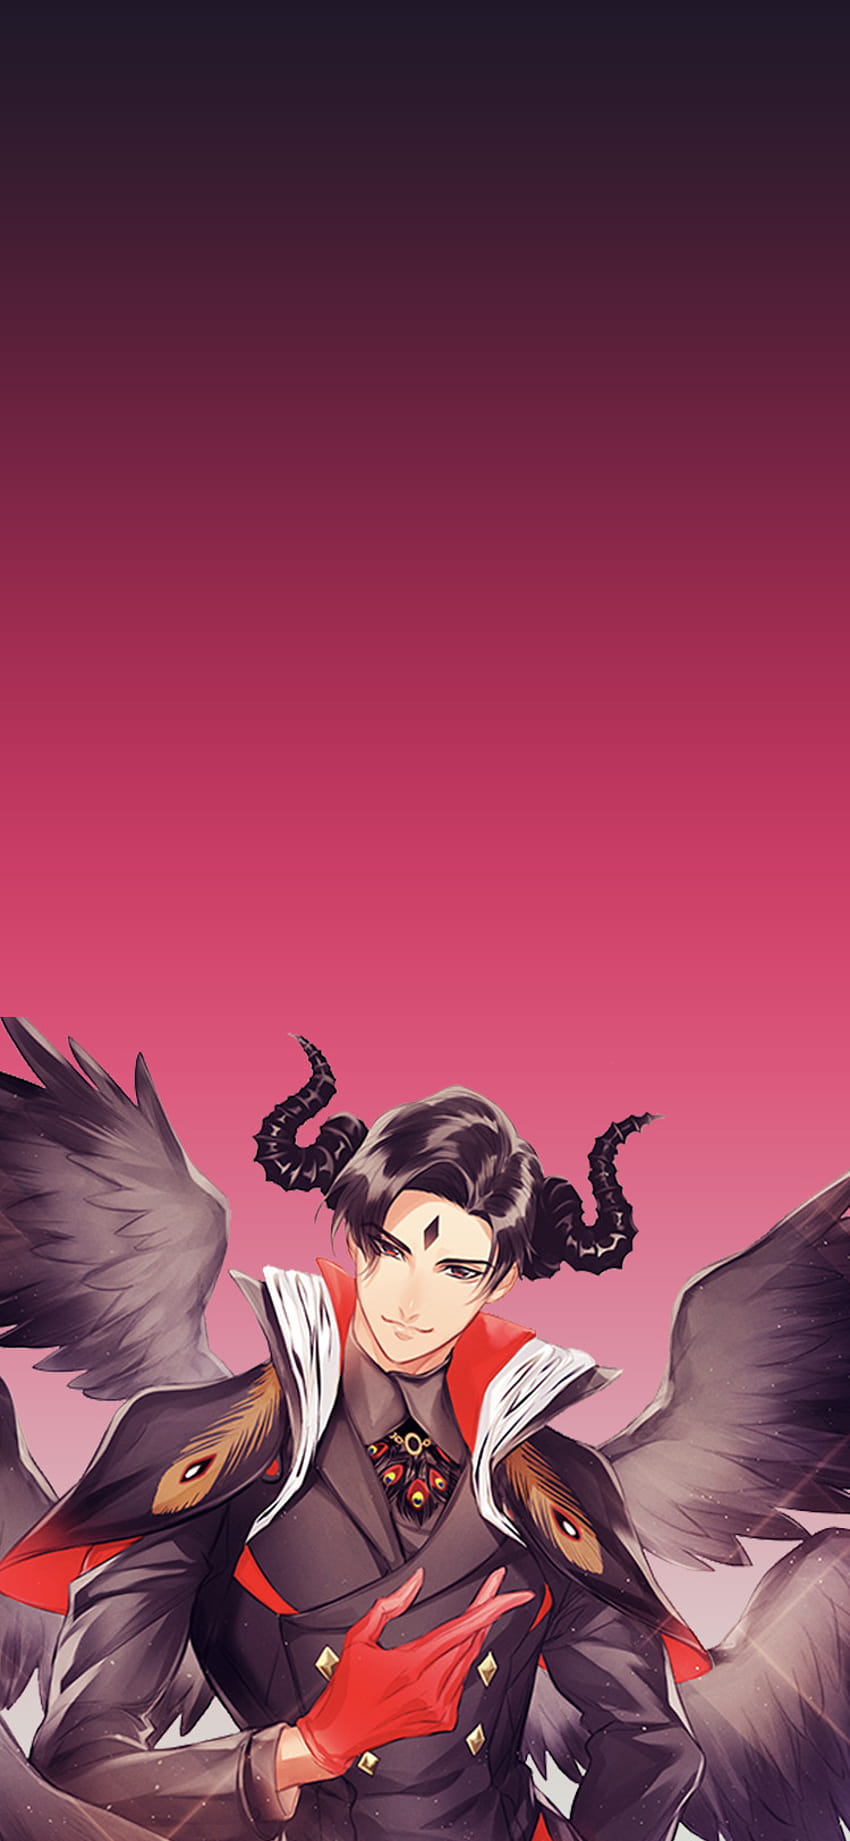 Lucifer Anime Wallpapers - Wallpaper Cave